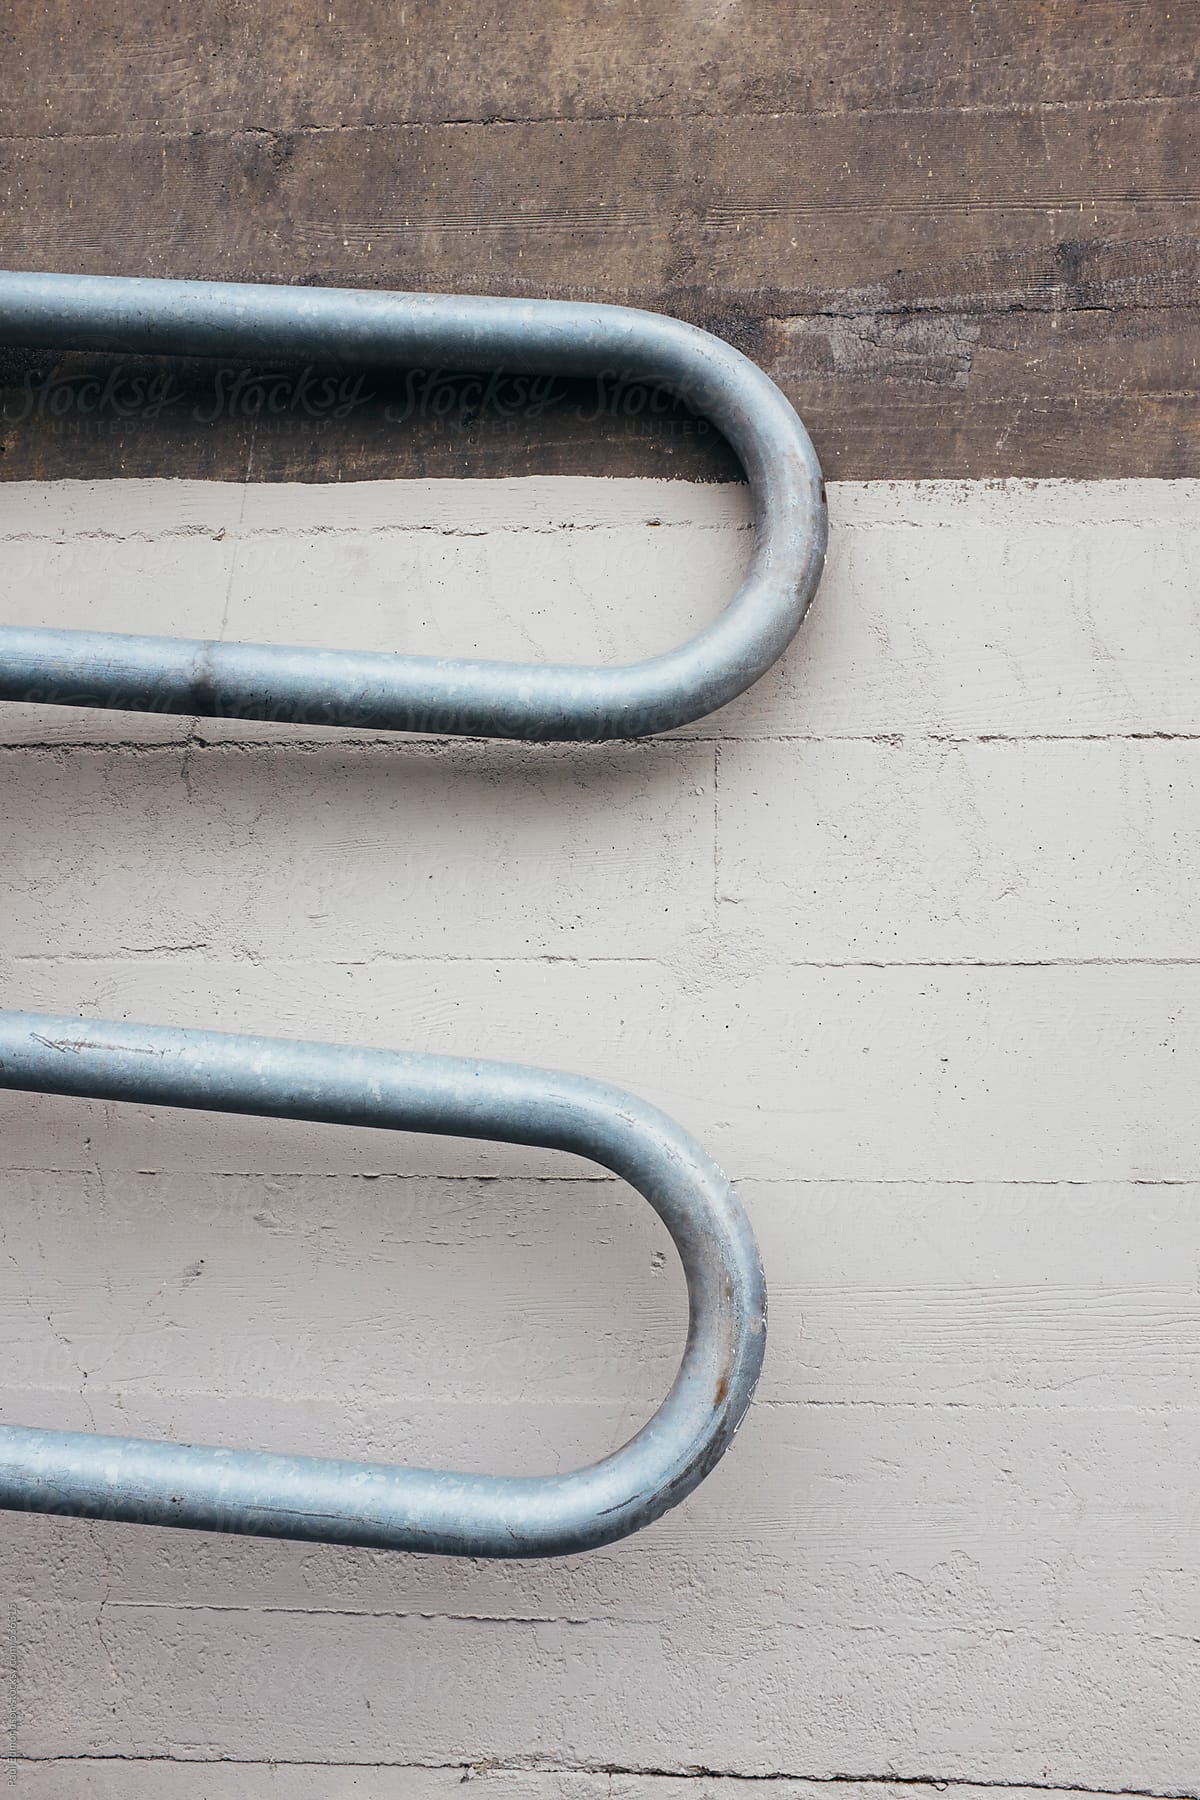 Curved metal bike rack leaning against concrete wall